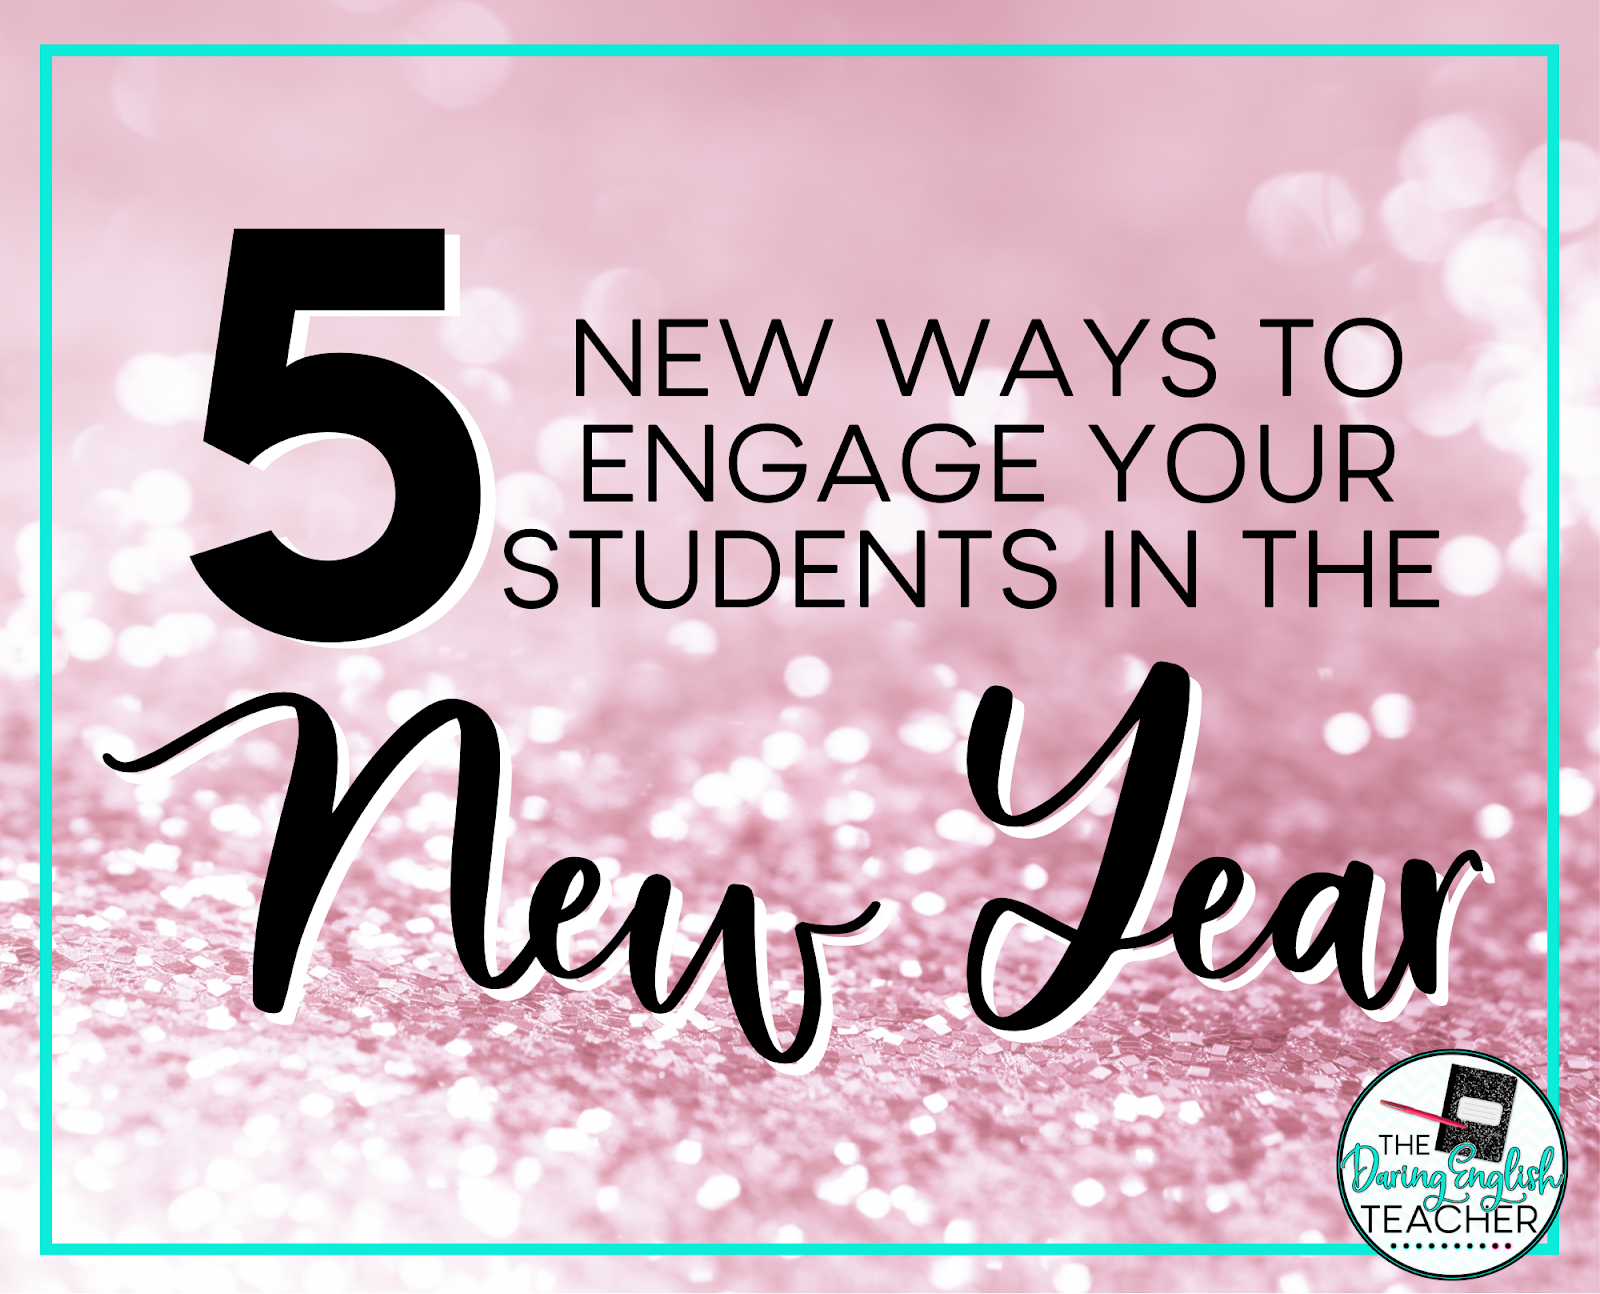 5 New Ways to Engage Students in the New Year